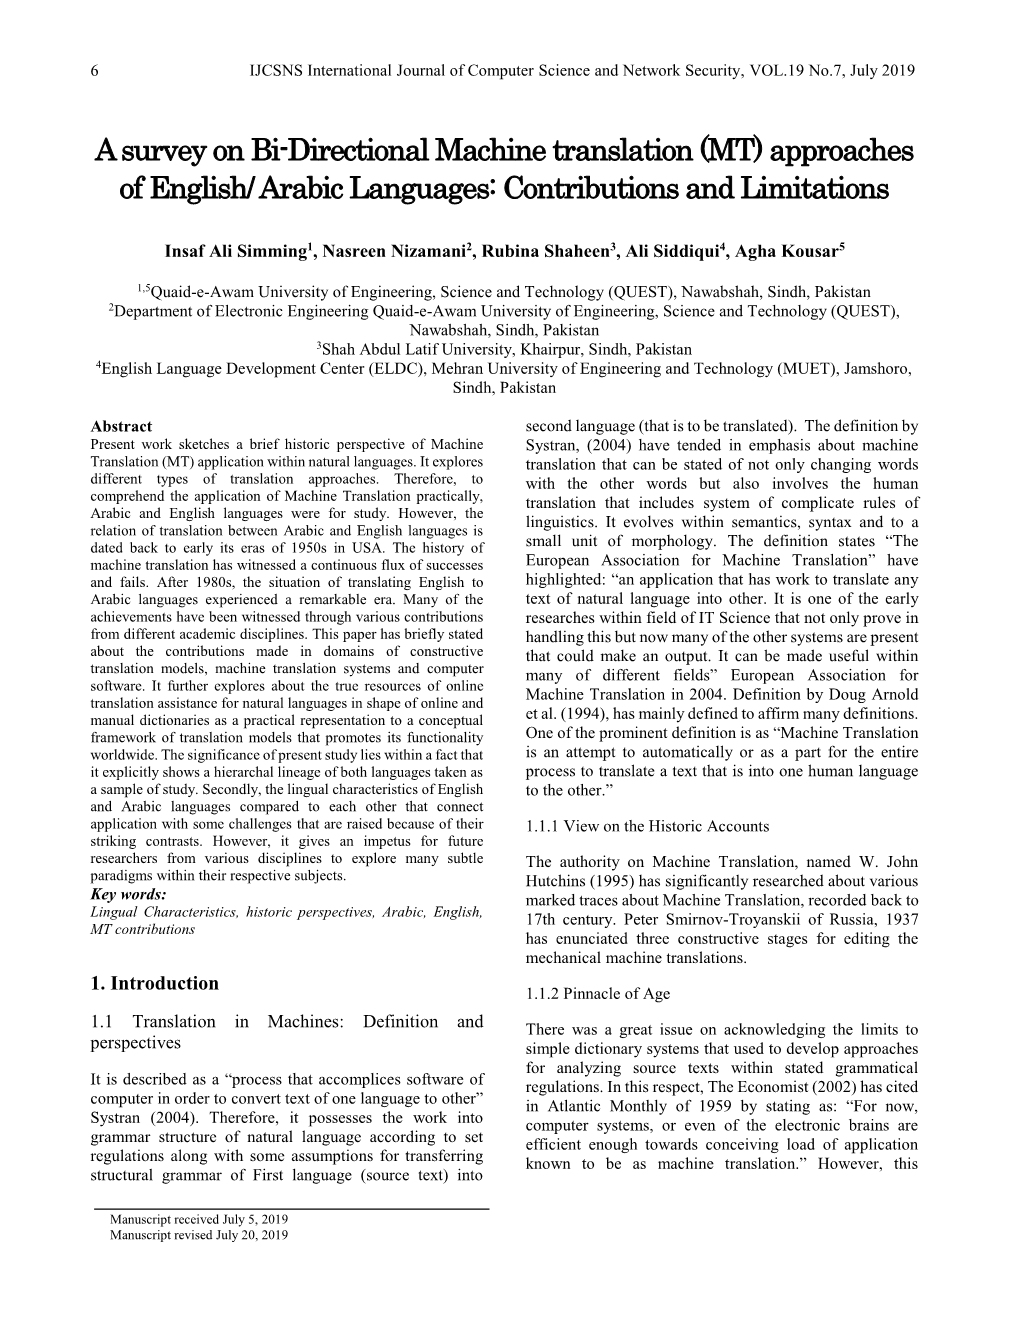 Arabic Languages: Contributions and Limitations